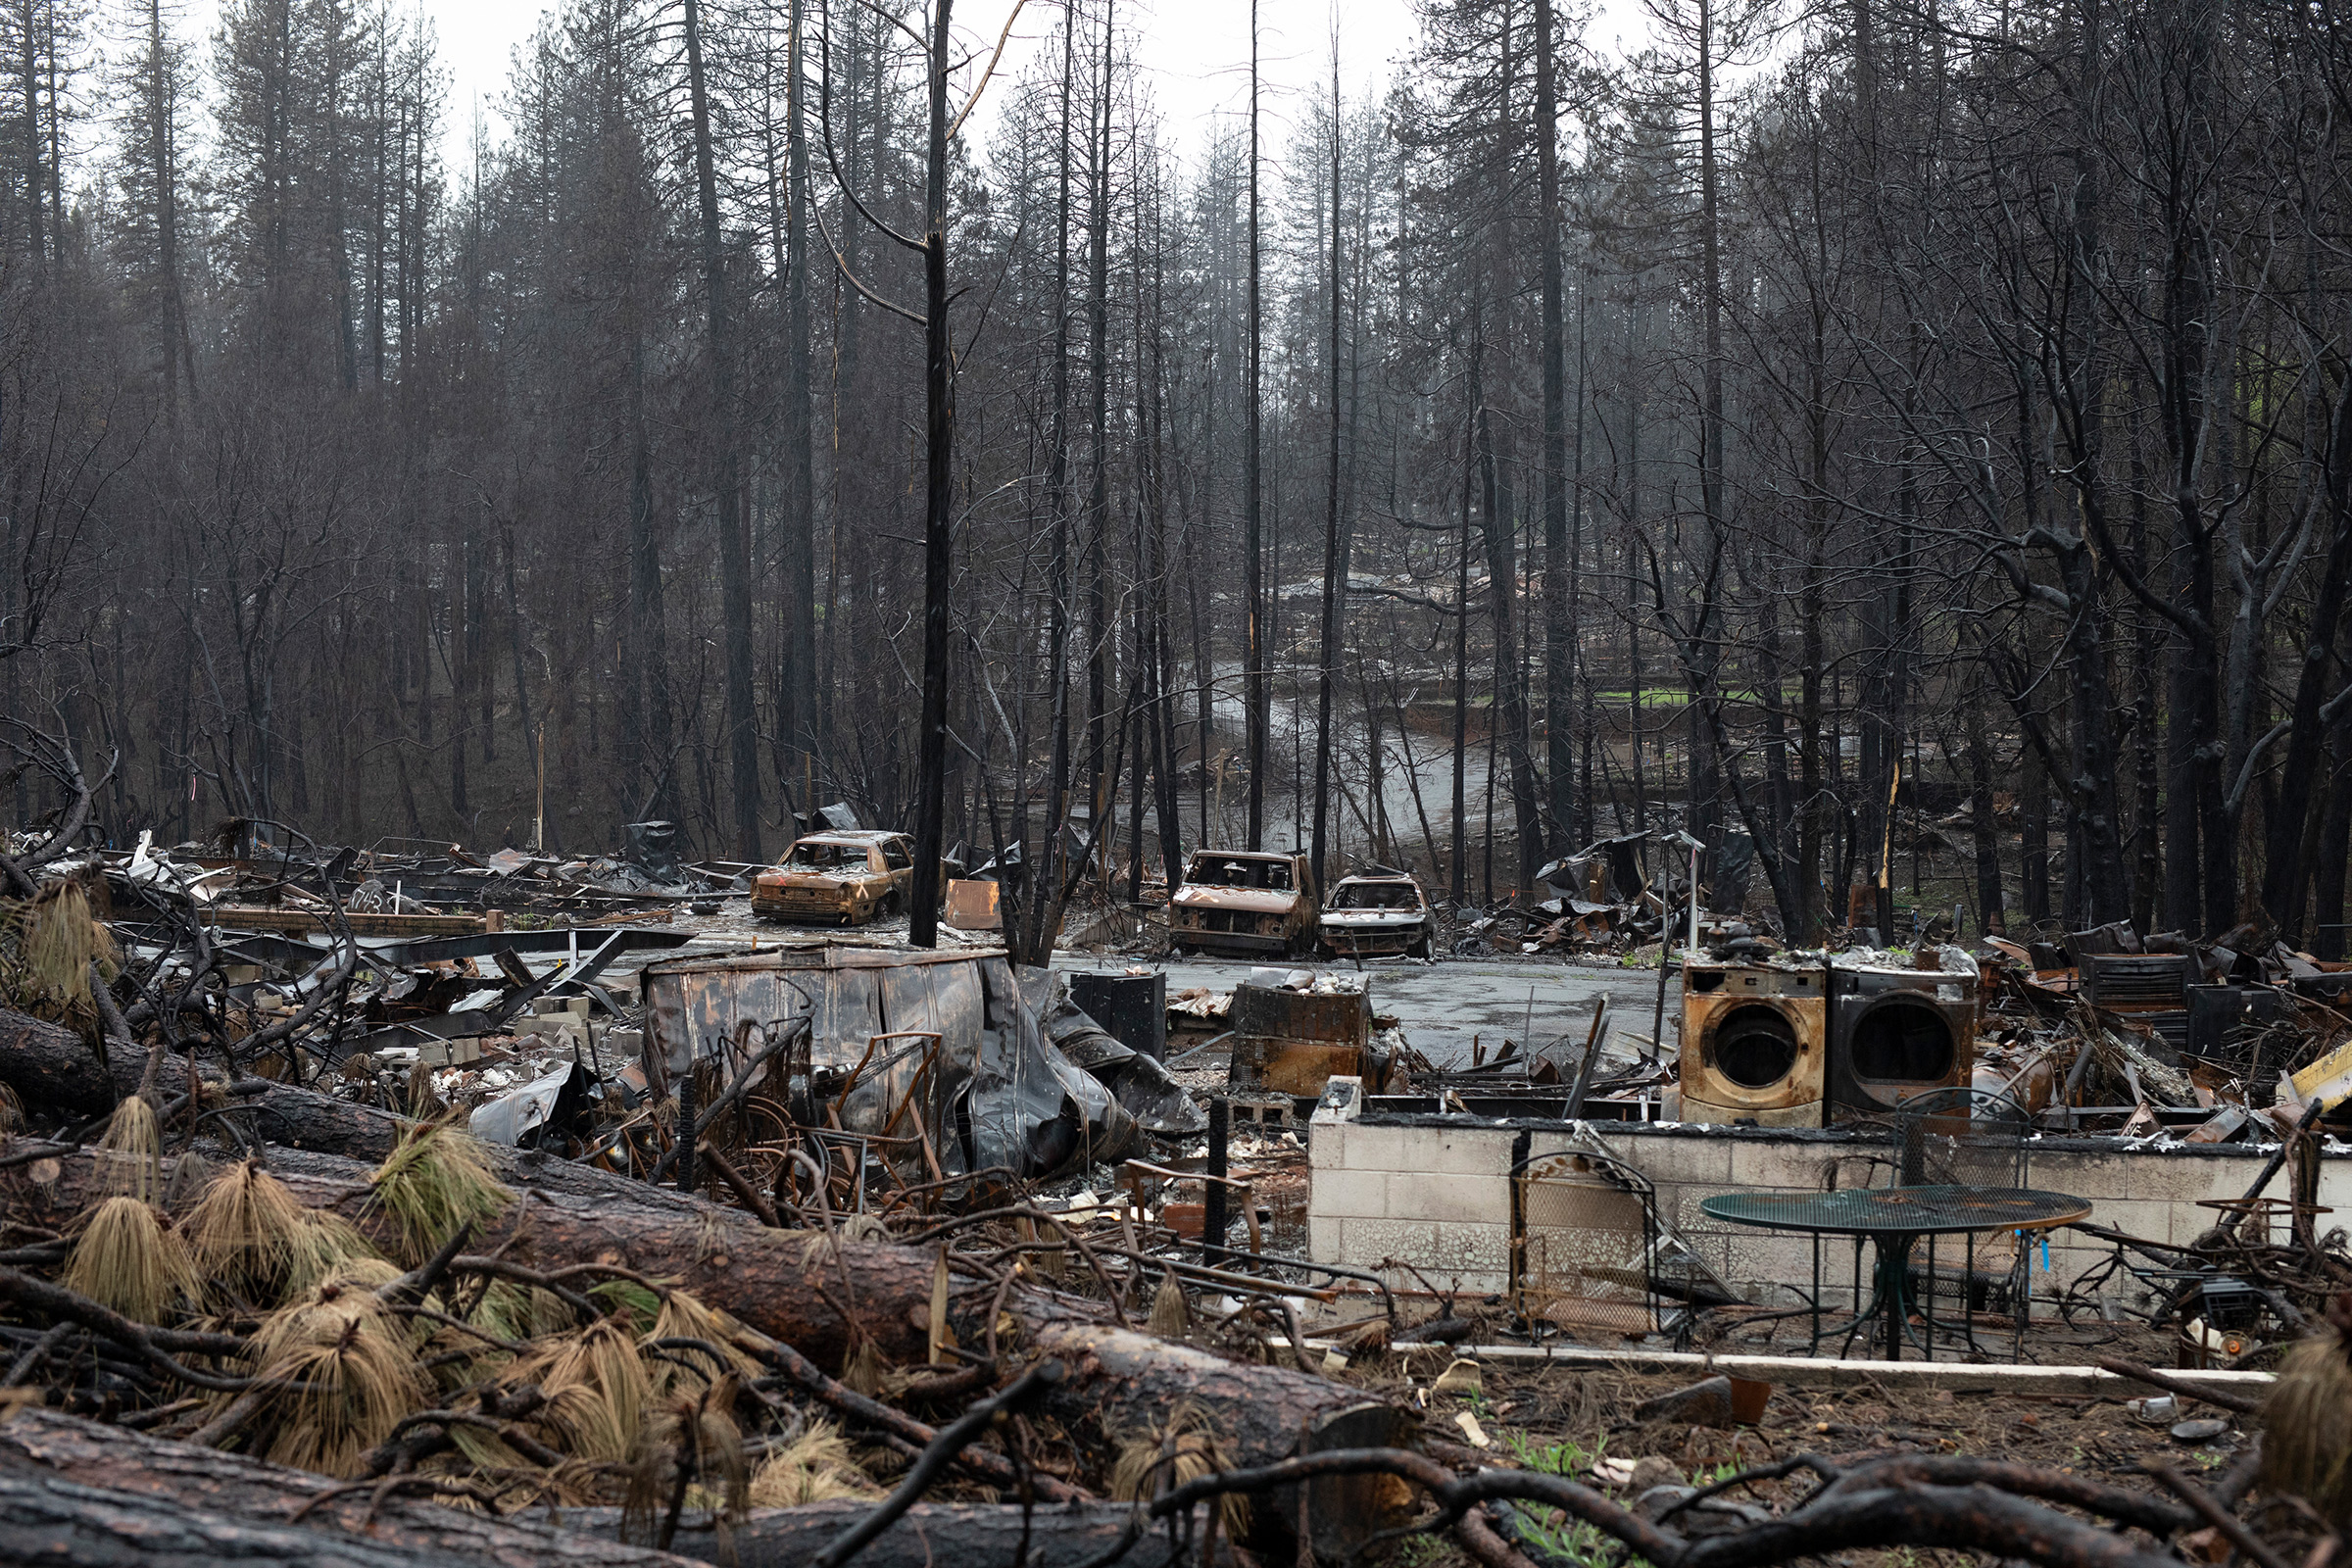 Burned down property in Paradise, strewn with debris